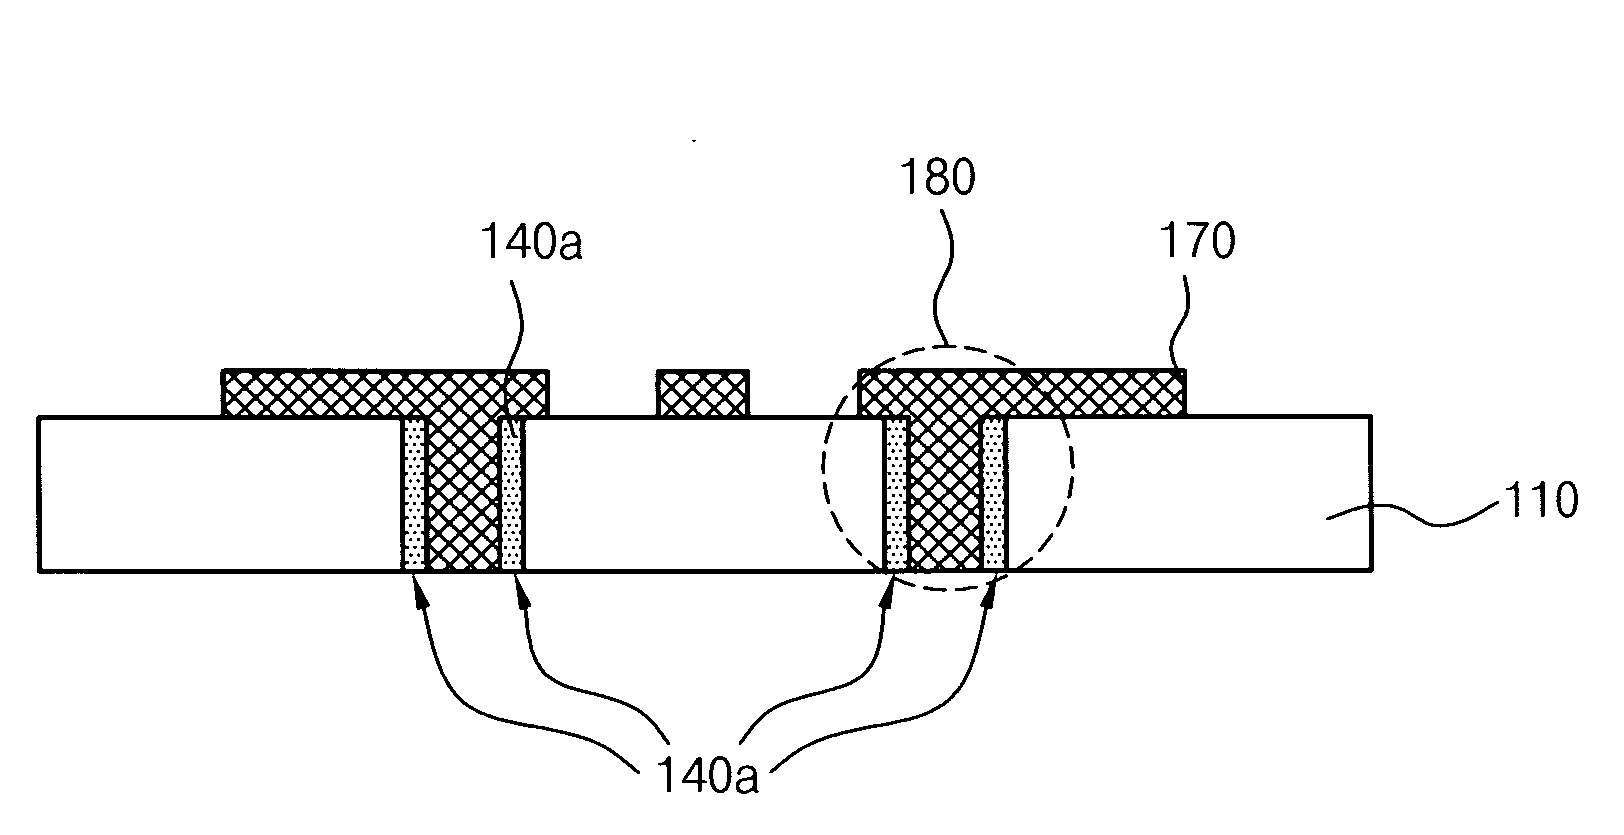 Through-silicon via and method for forming the same